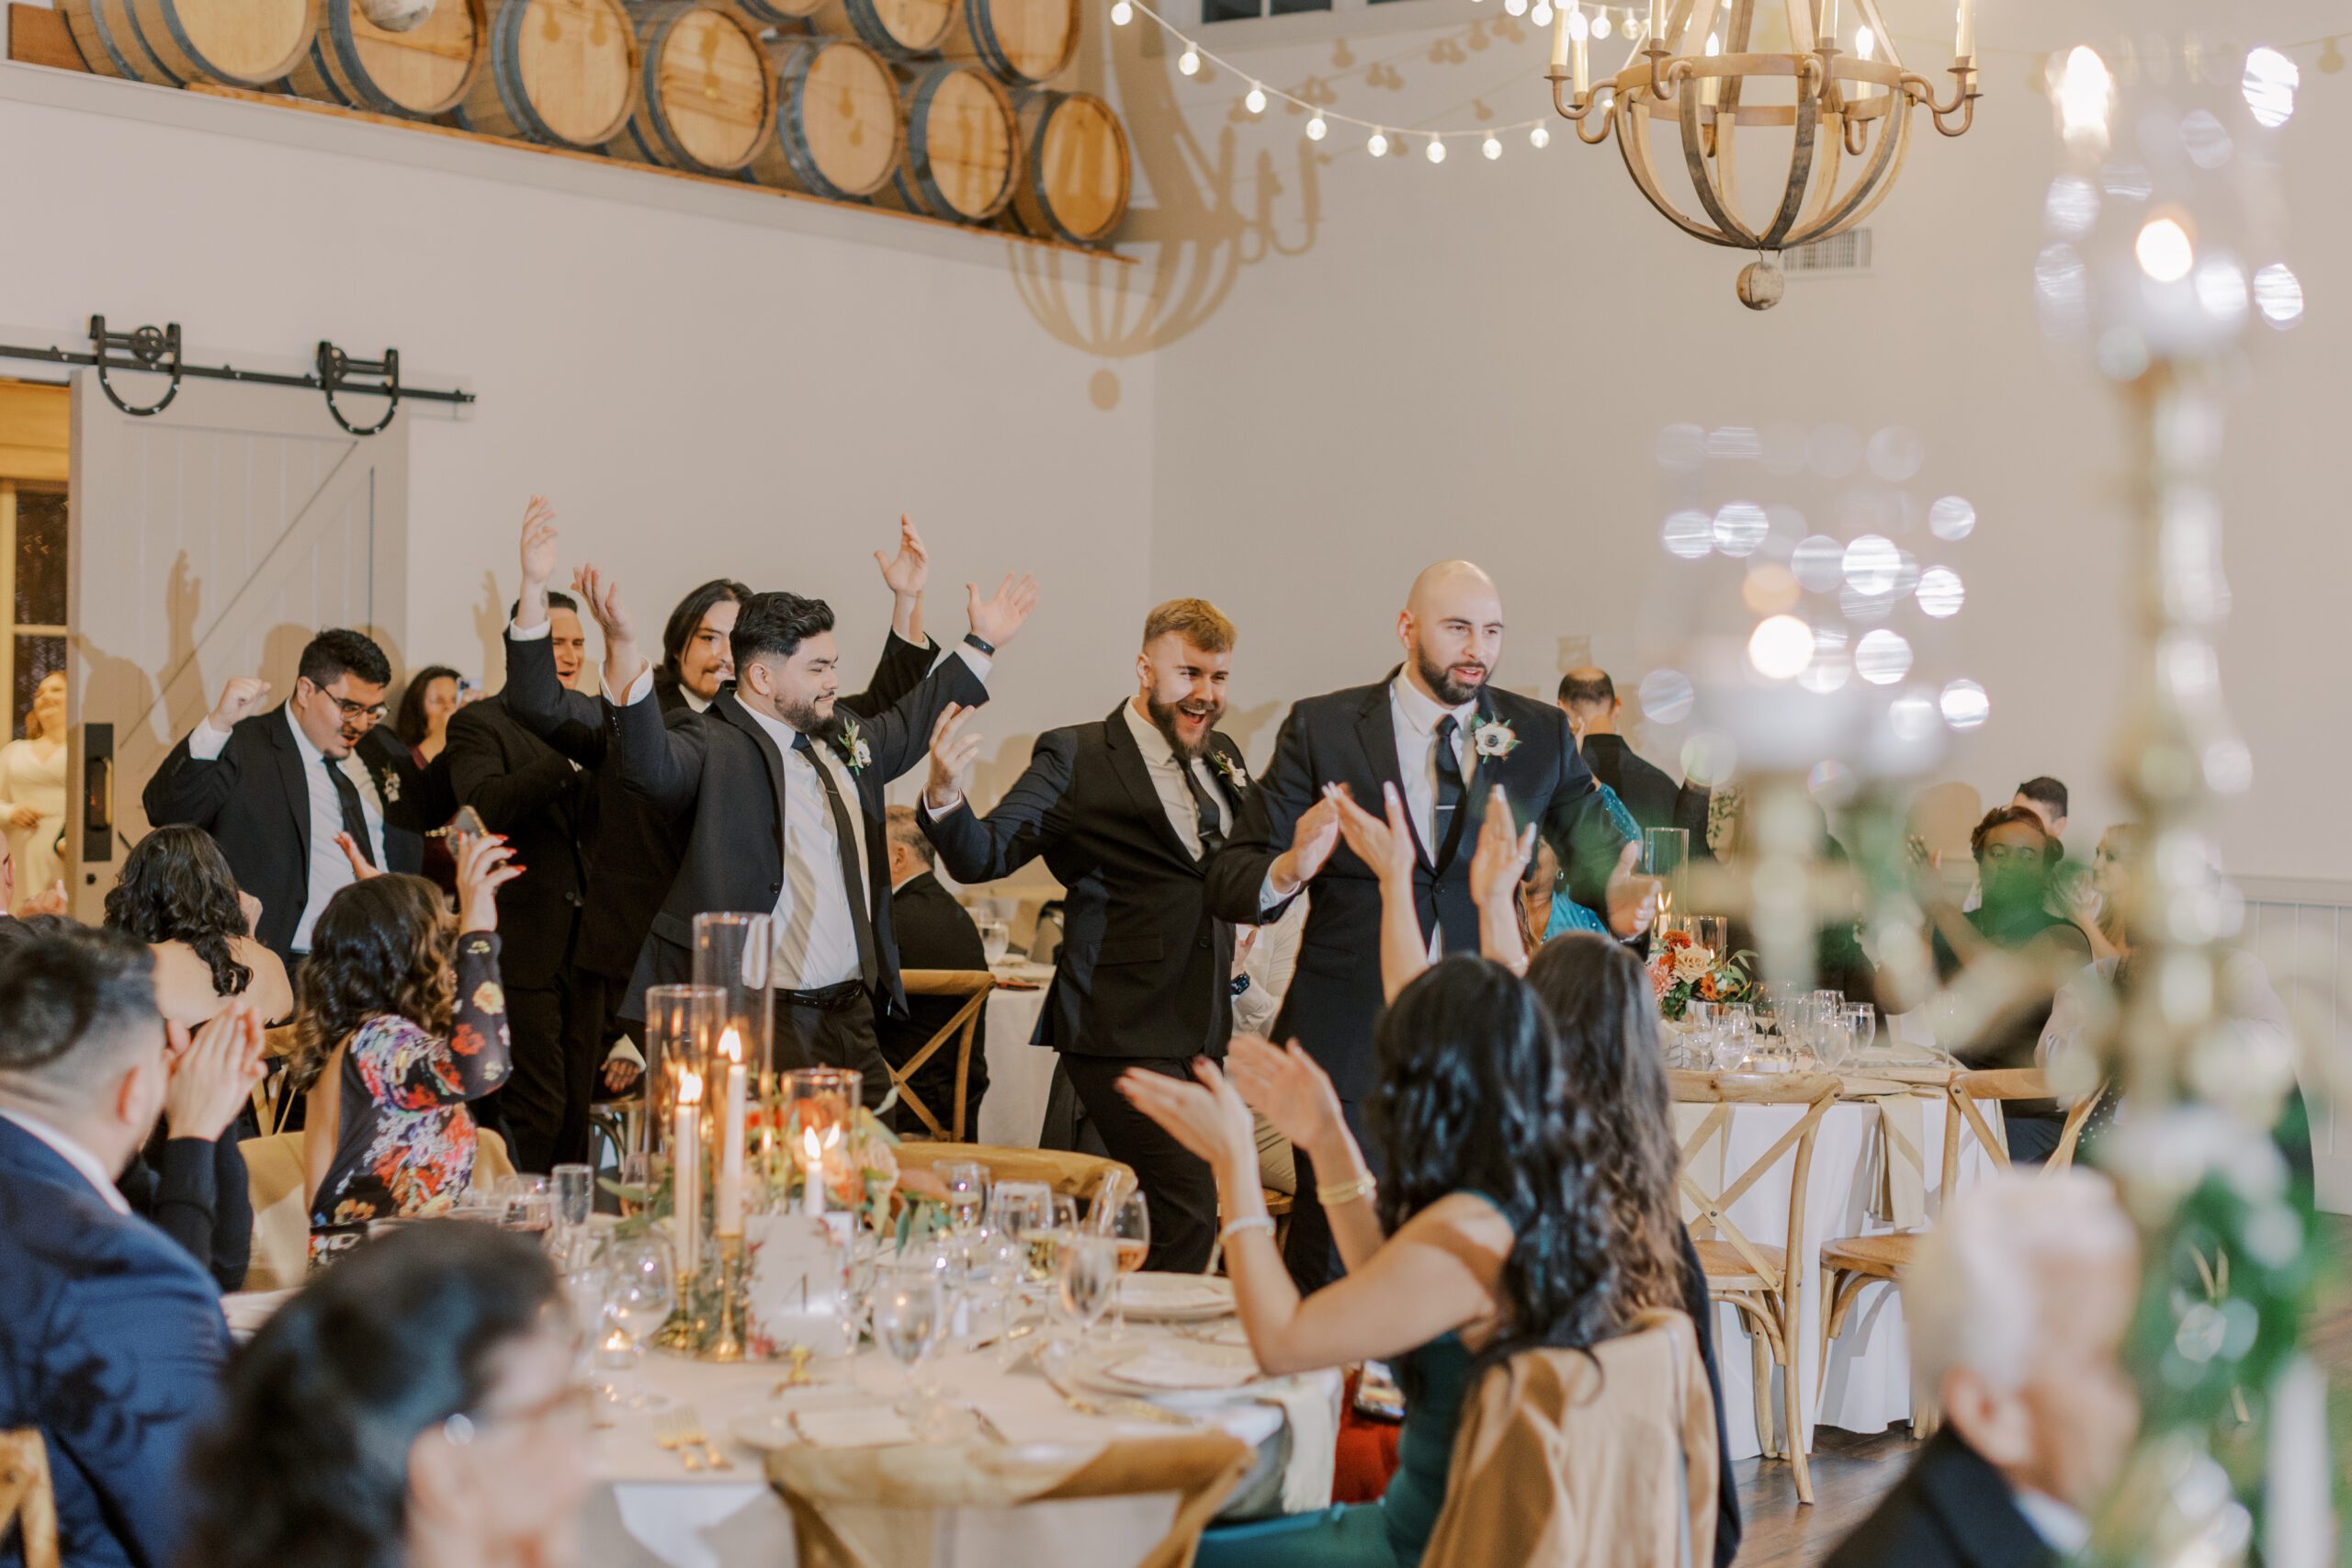 Groomsmen enter the reception with hands in air, cheering and smiling